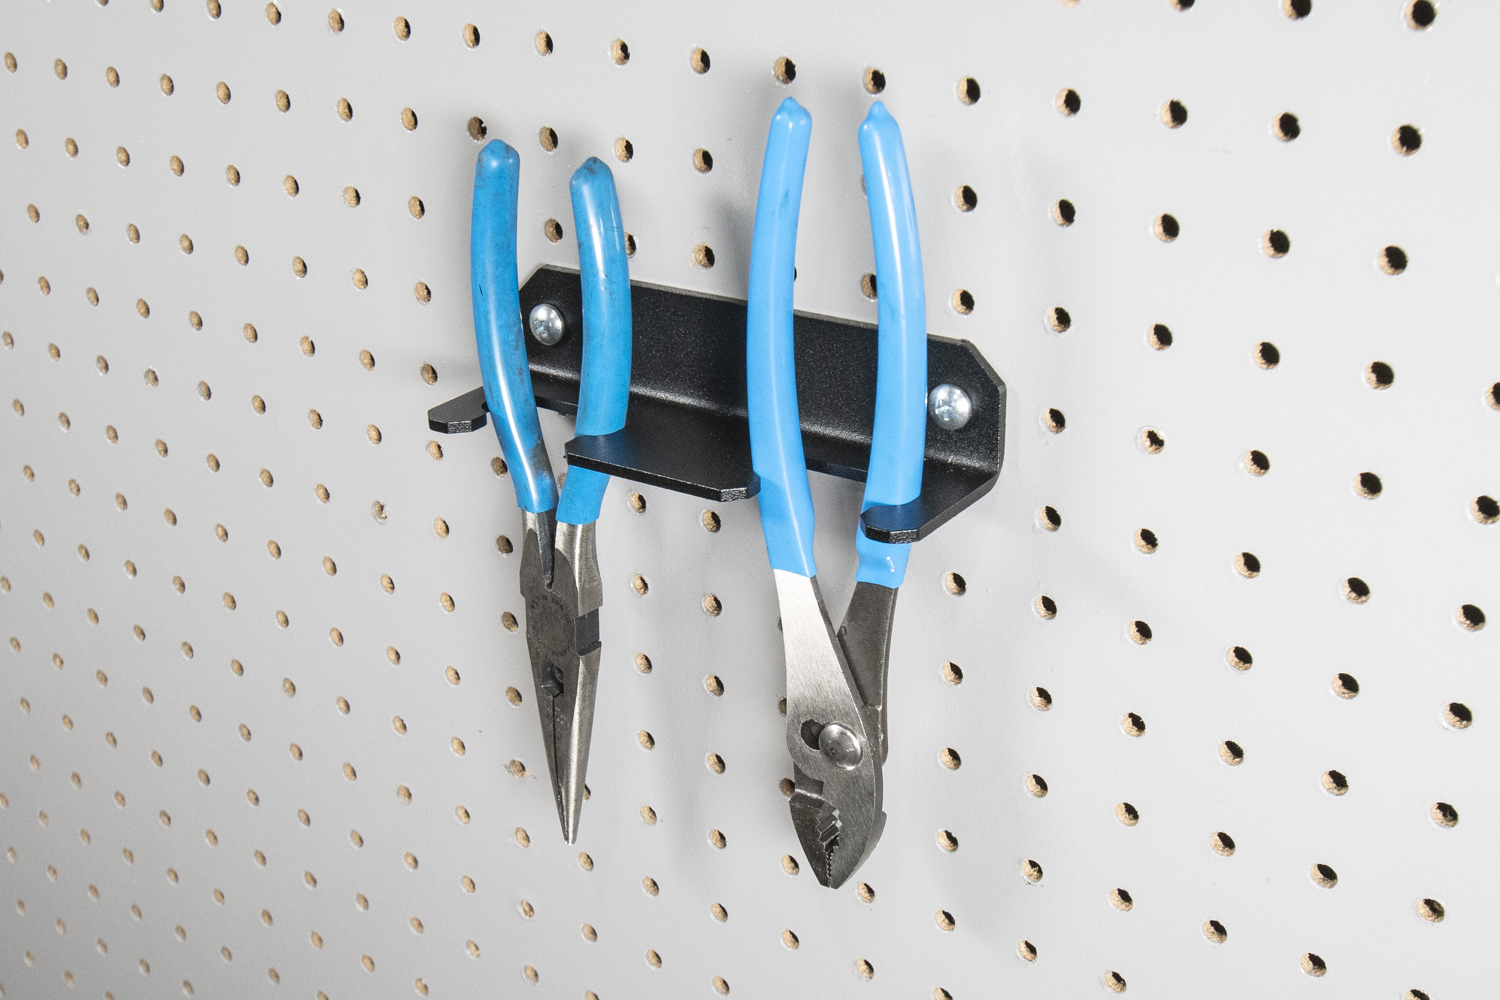 Double Plier Holder - In The Ditch Towing Products : In The Ditch Towing  Products